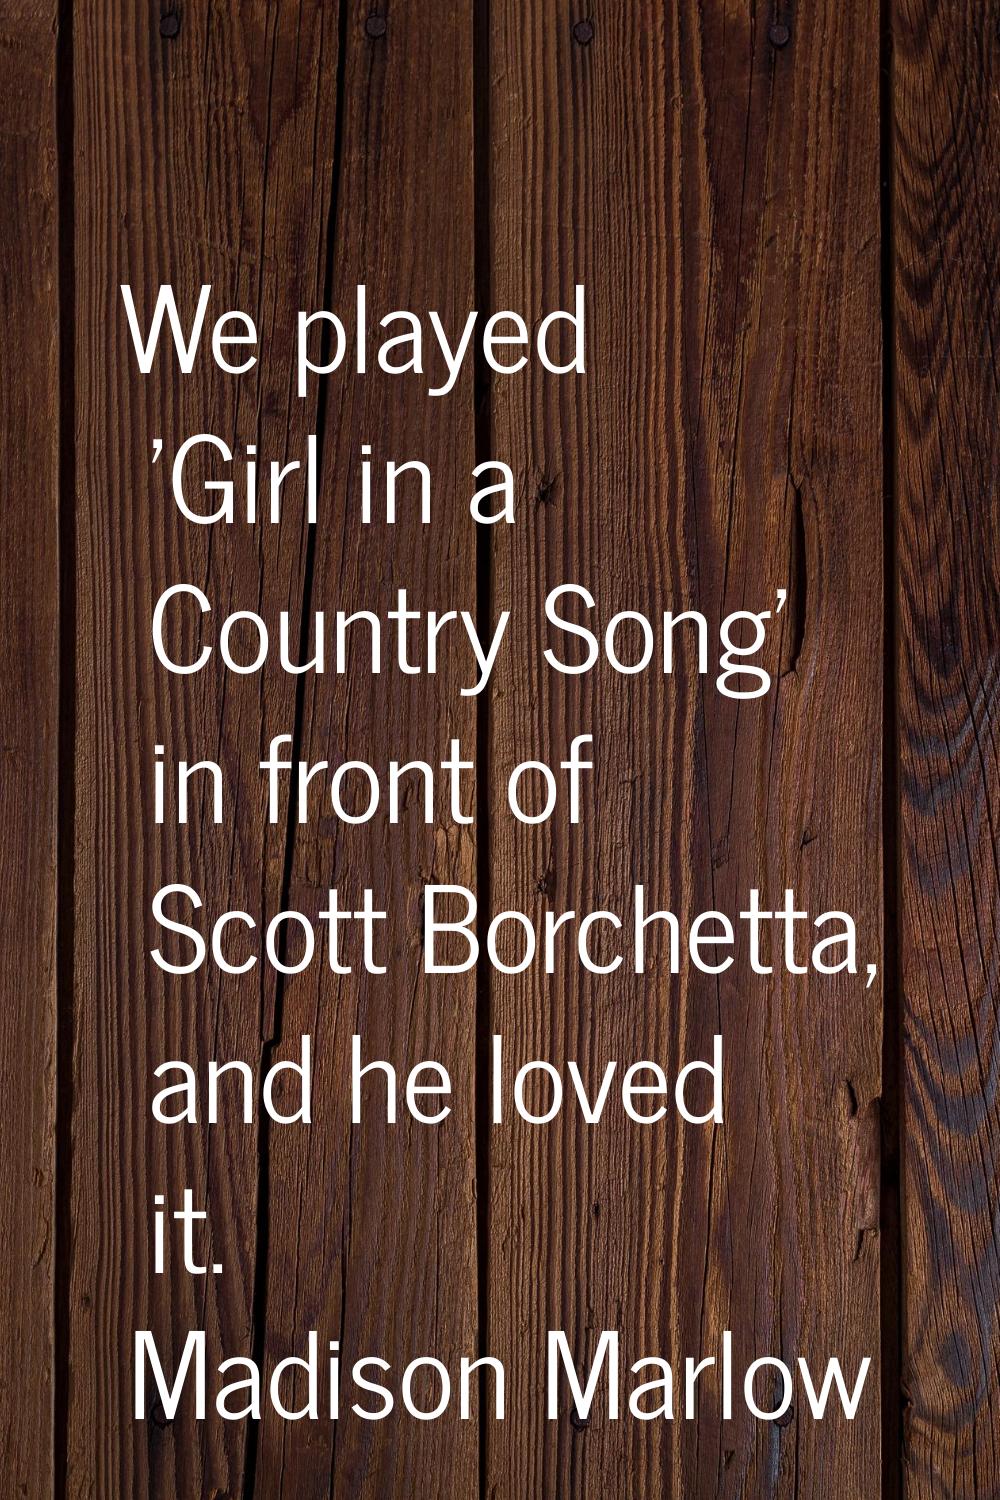 We played 'Girl in a Country Song' in front of Scott Borchetta, and he loved it.